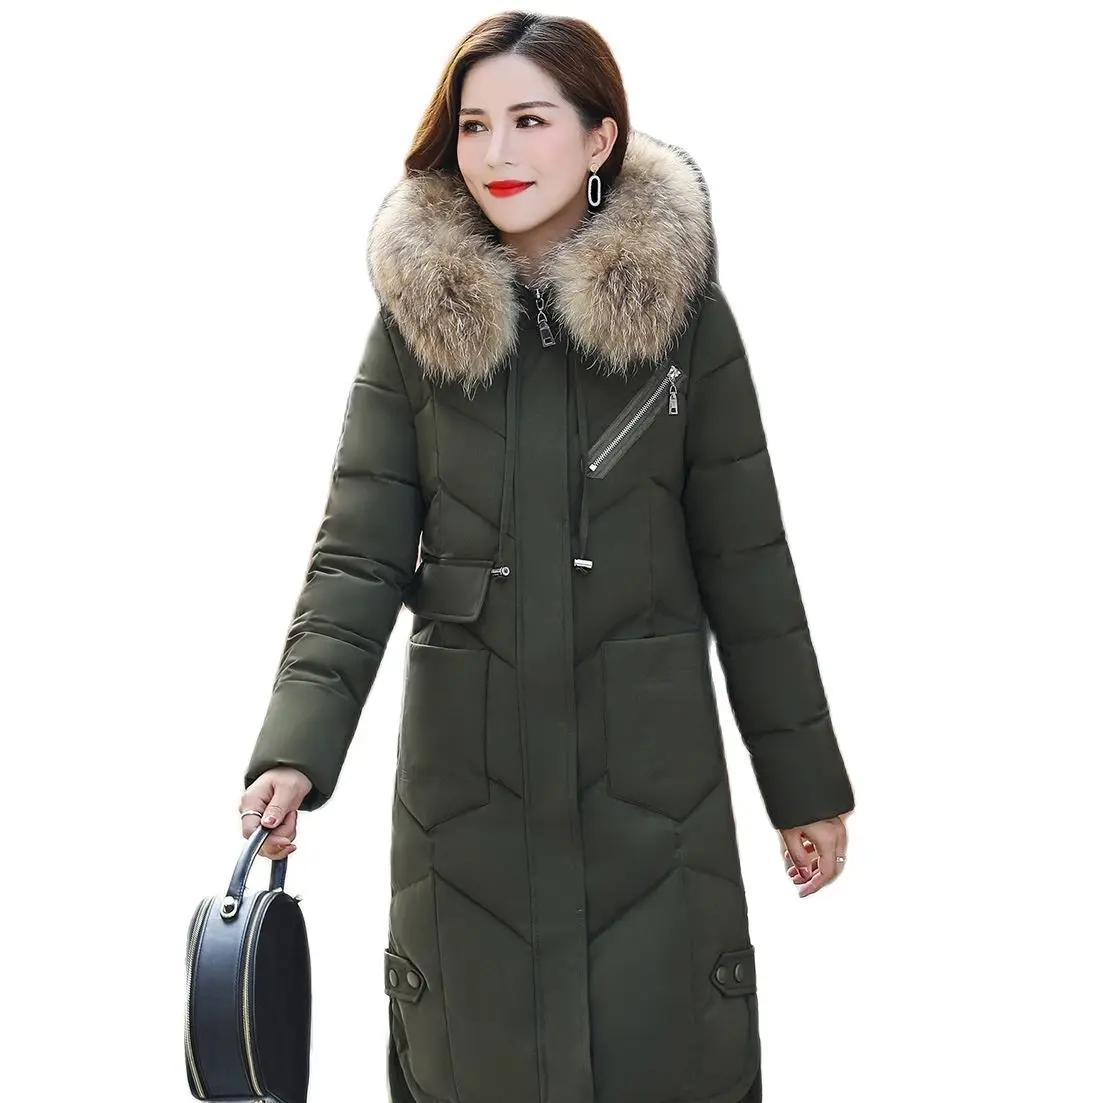 

2021 New Plus Size Cotton-Padded Jacket Slim Mid-Length Female Down Jackets Women Winter Coat Hooded Top Over-The-Knee Overwear